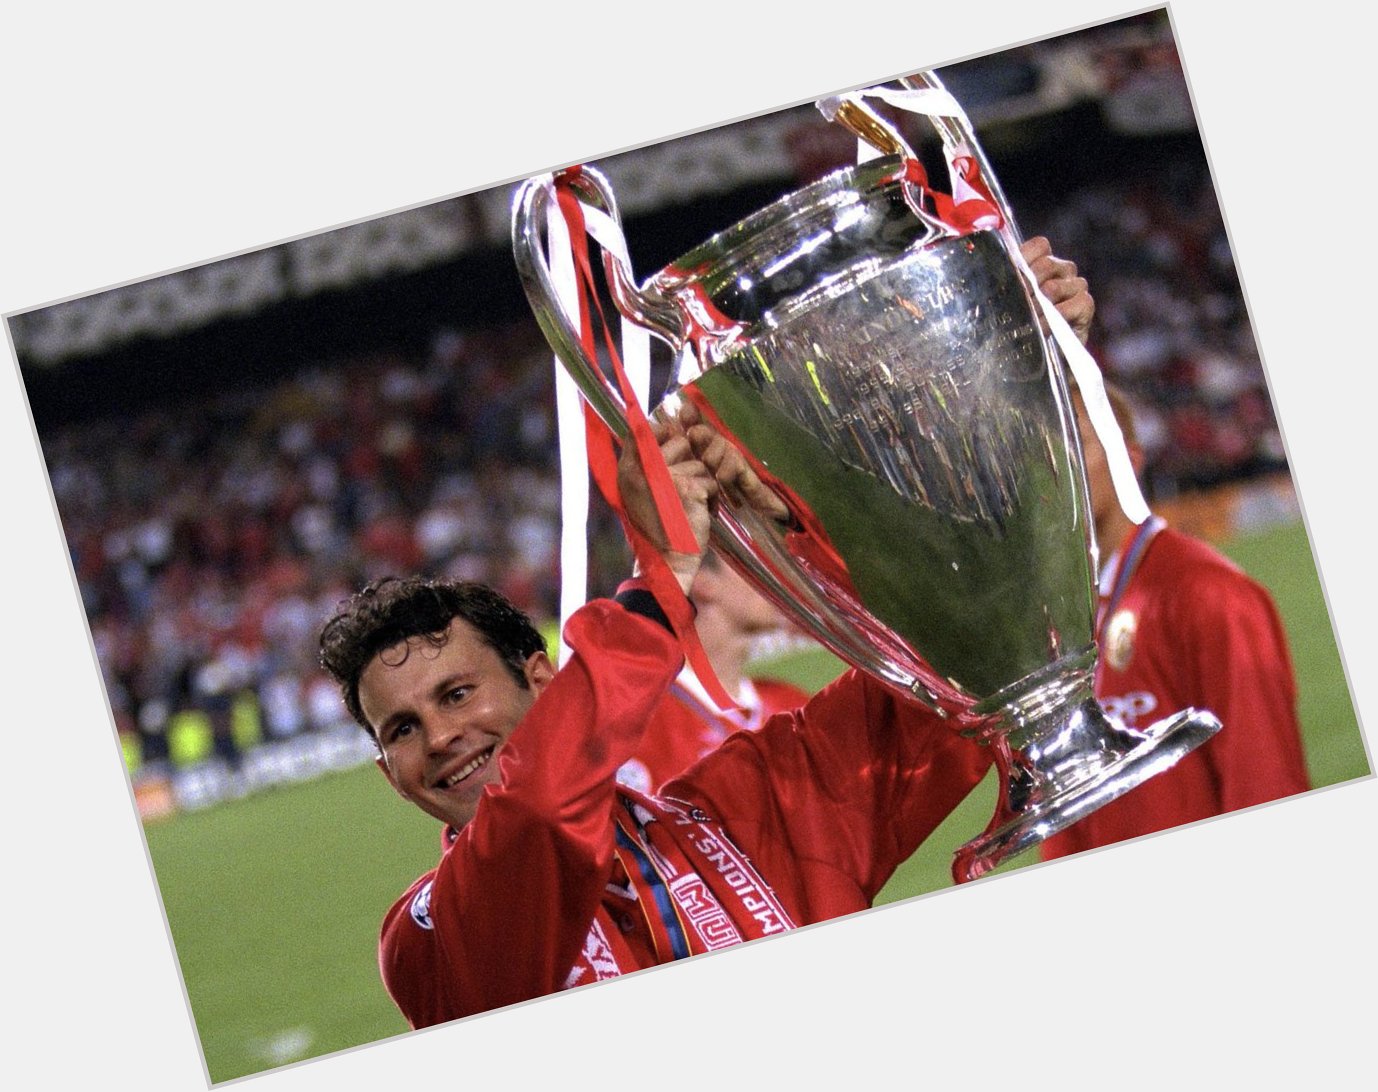   - Games: 963

- Goals: 168

- Trophies: 34

Happy Birthday to Manchester United legend, Ryan Giggs!  